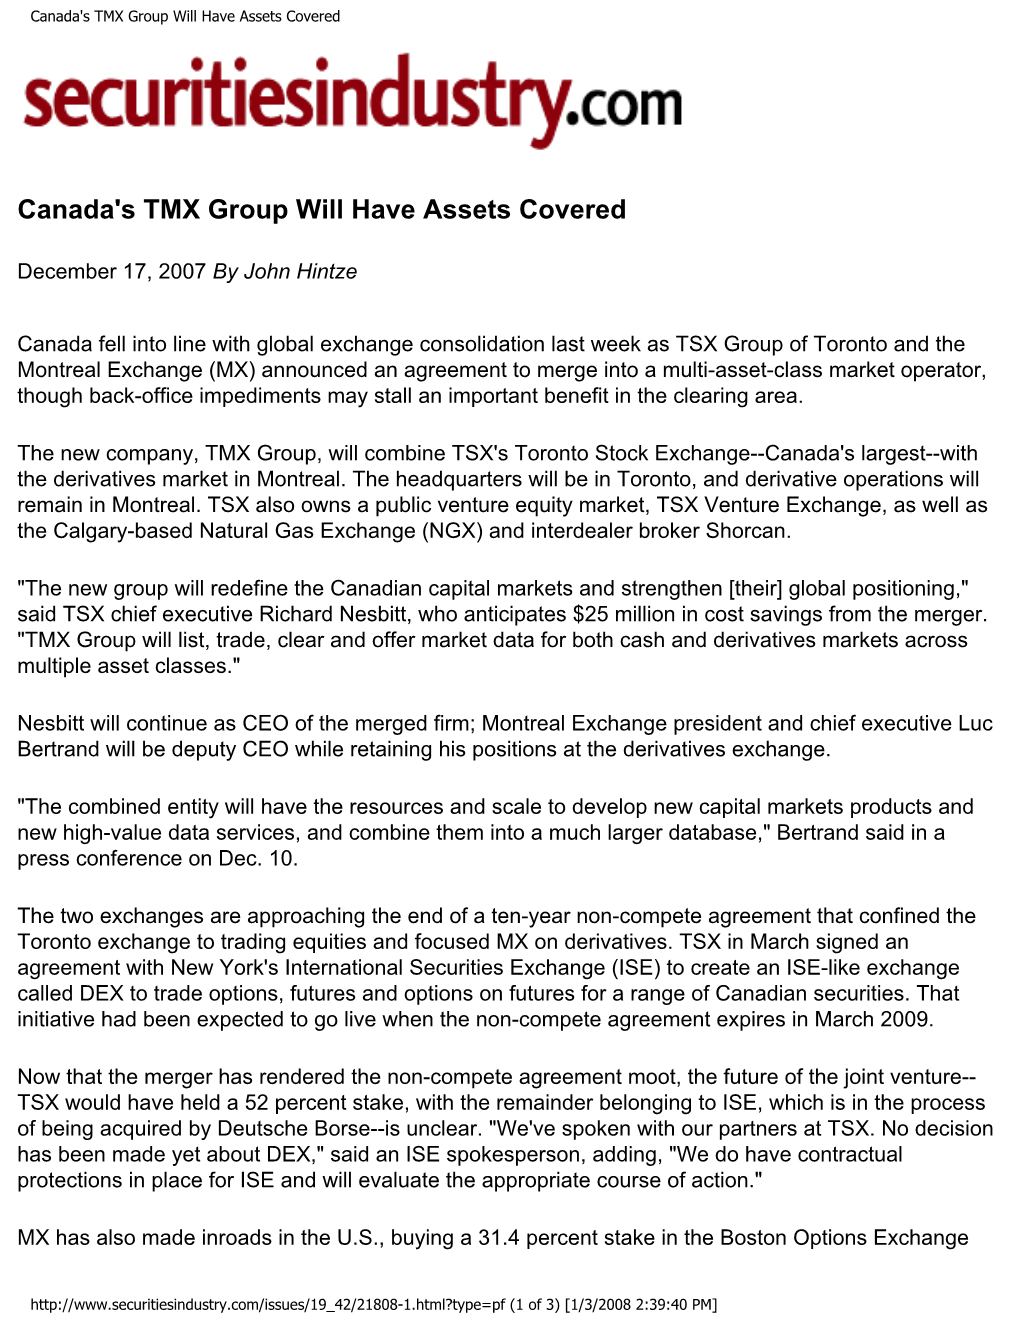 Canada's TMX Group Will Have Assets Covered